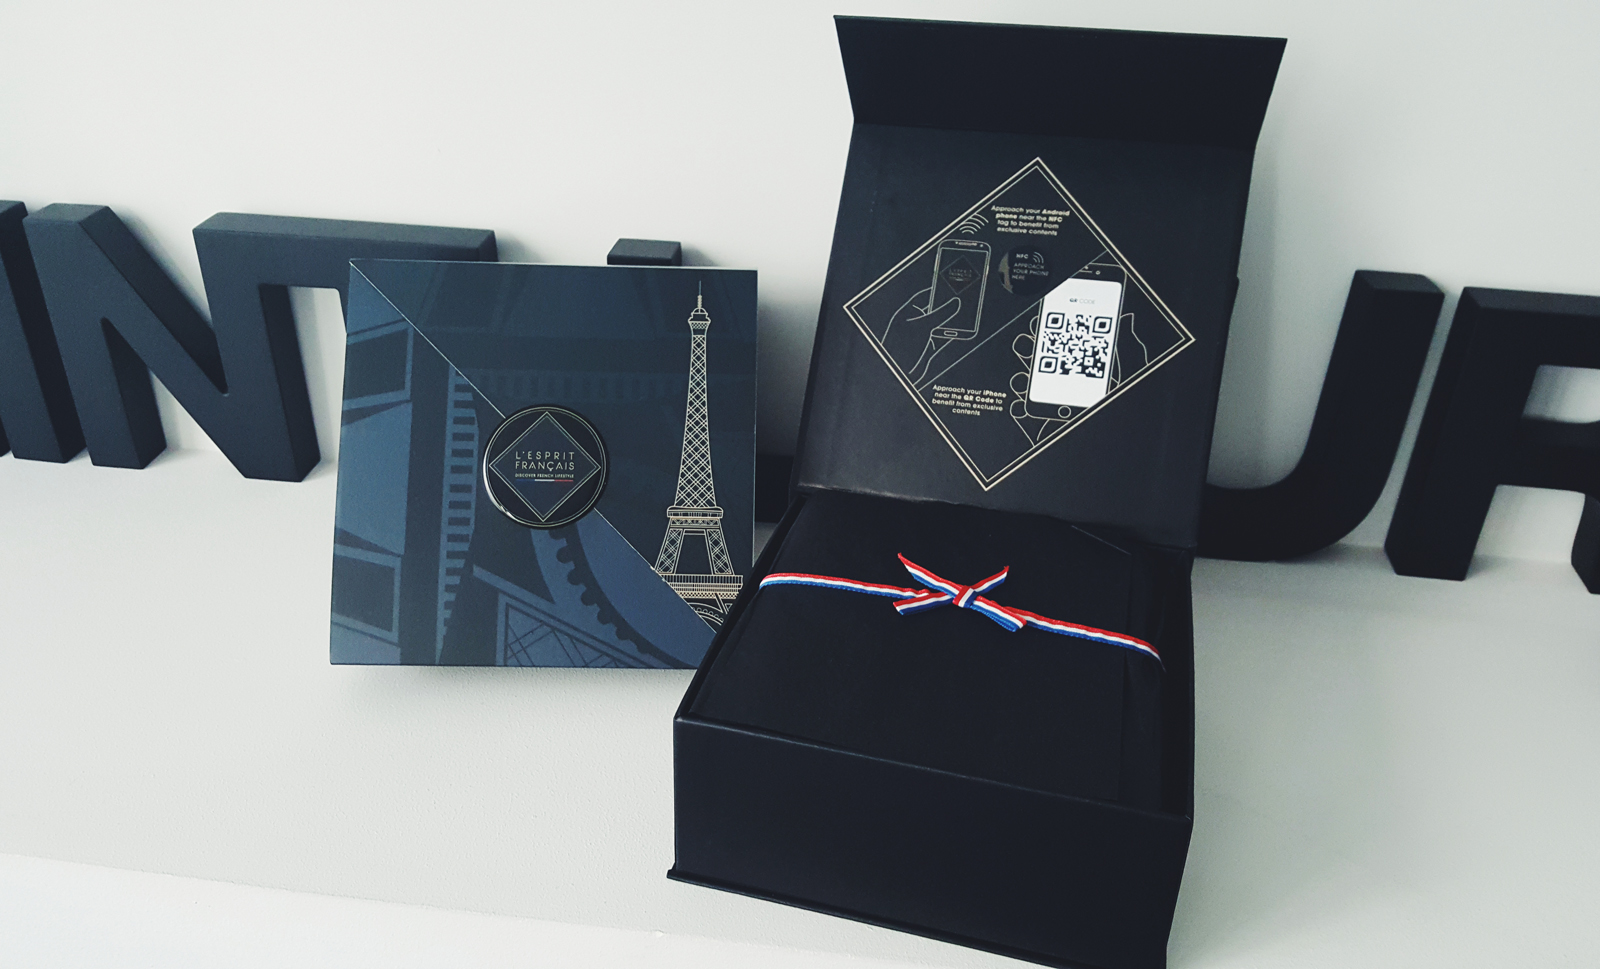 L esprit francais gift box collection Paris City Guide discover french style the best way experience the parisian lifestyle photo usofparis united states of paris blog